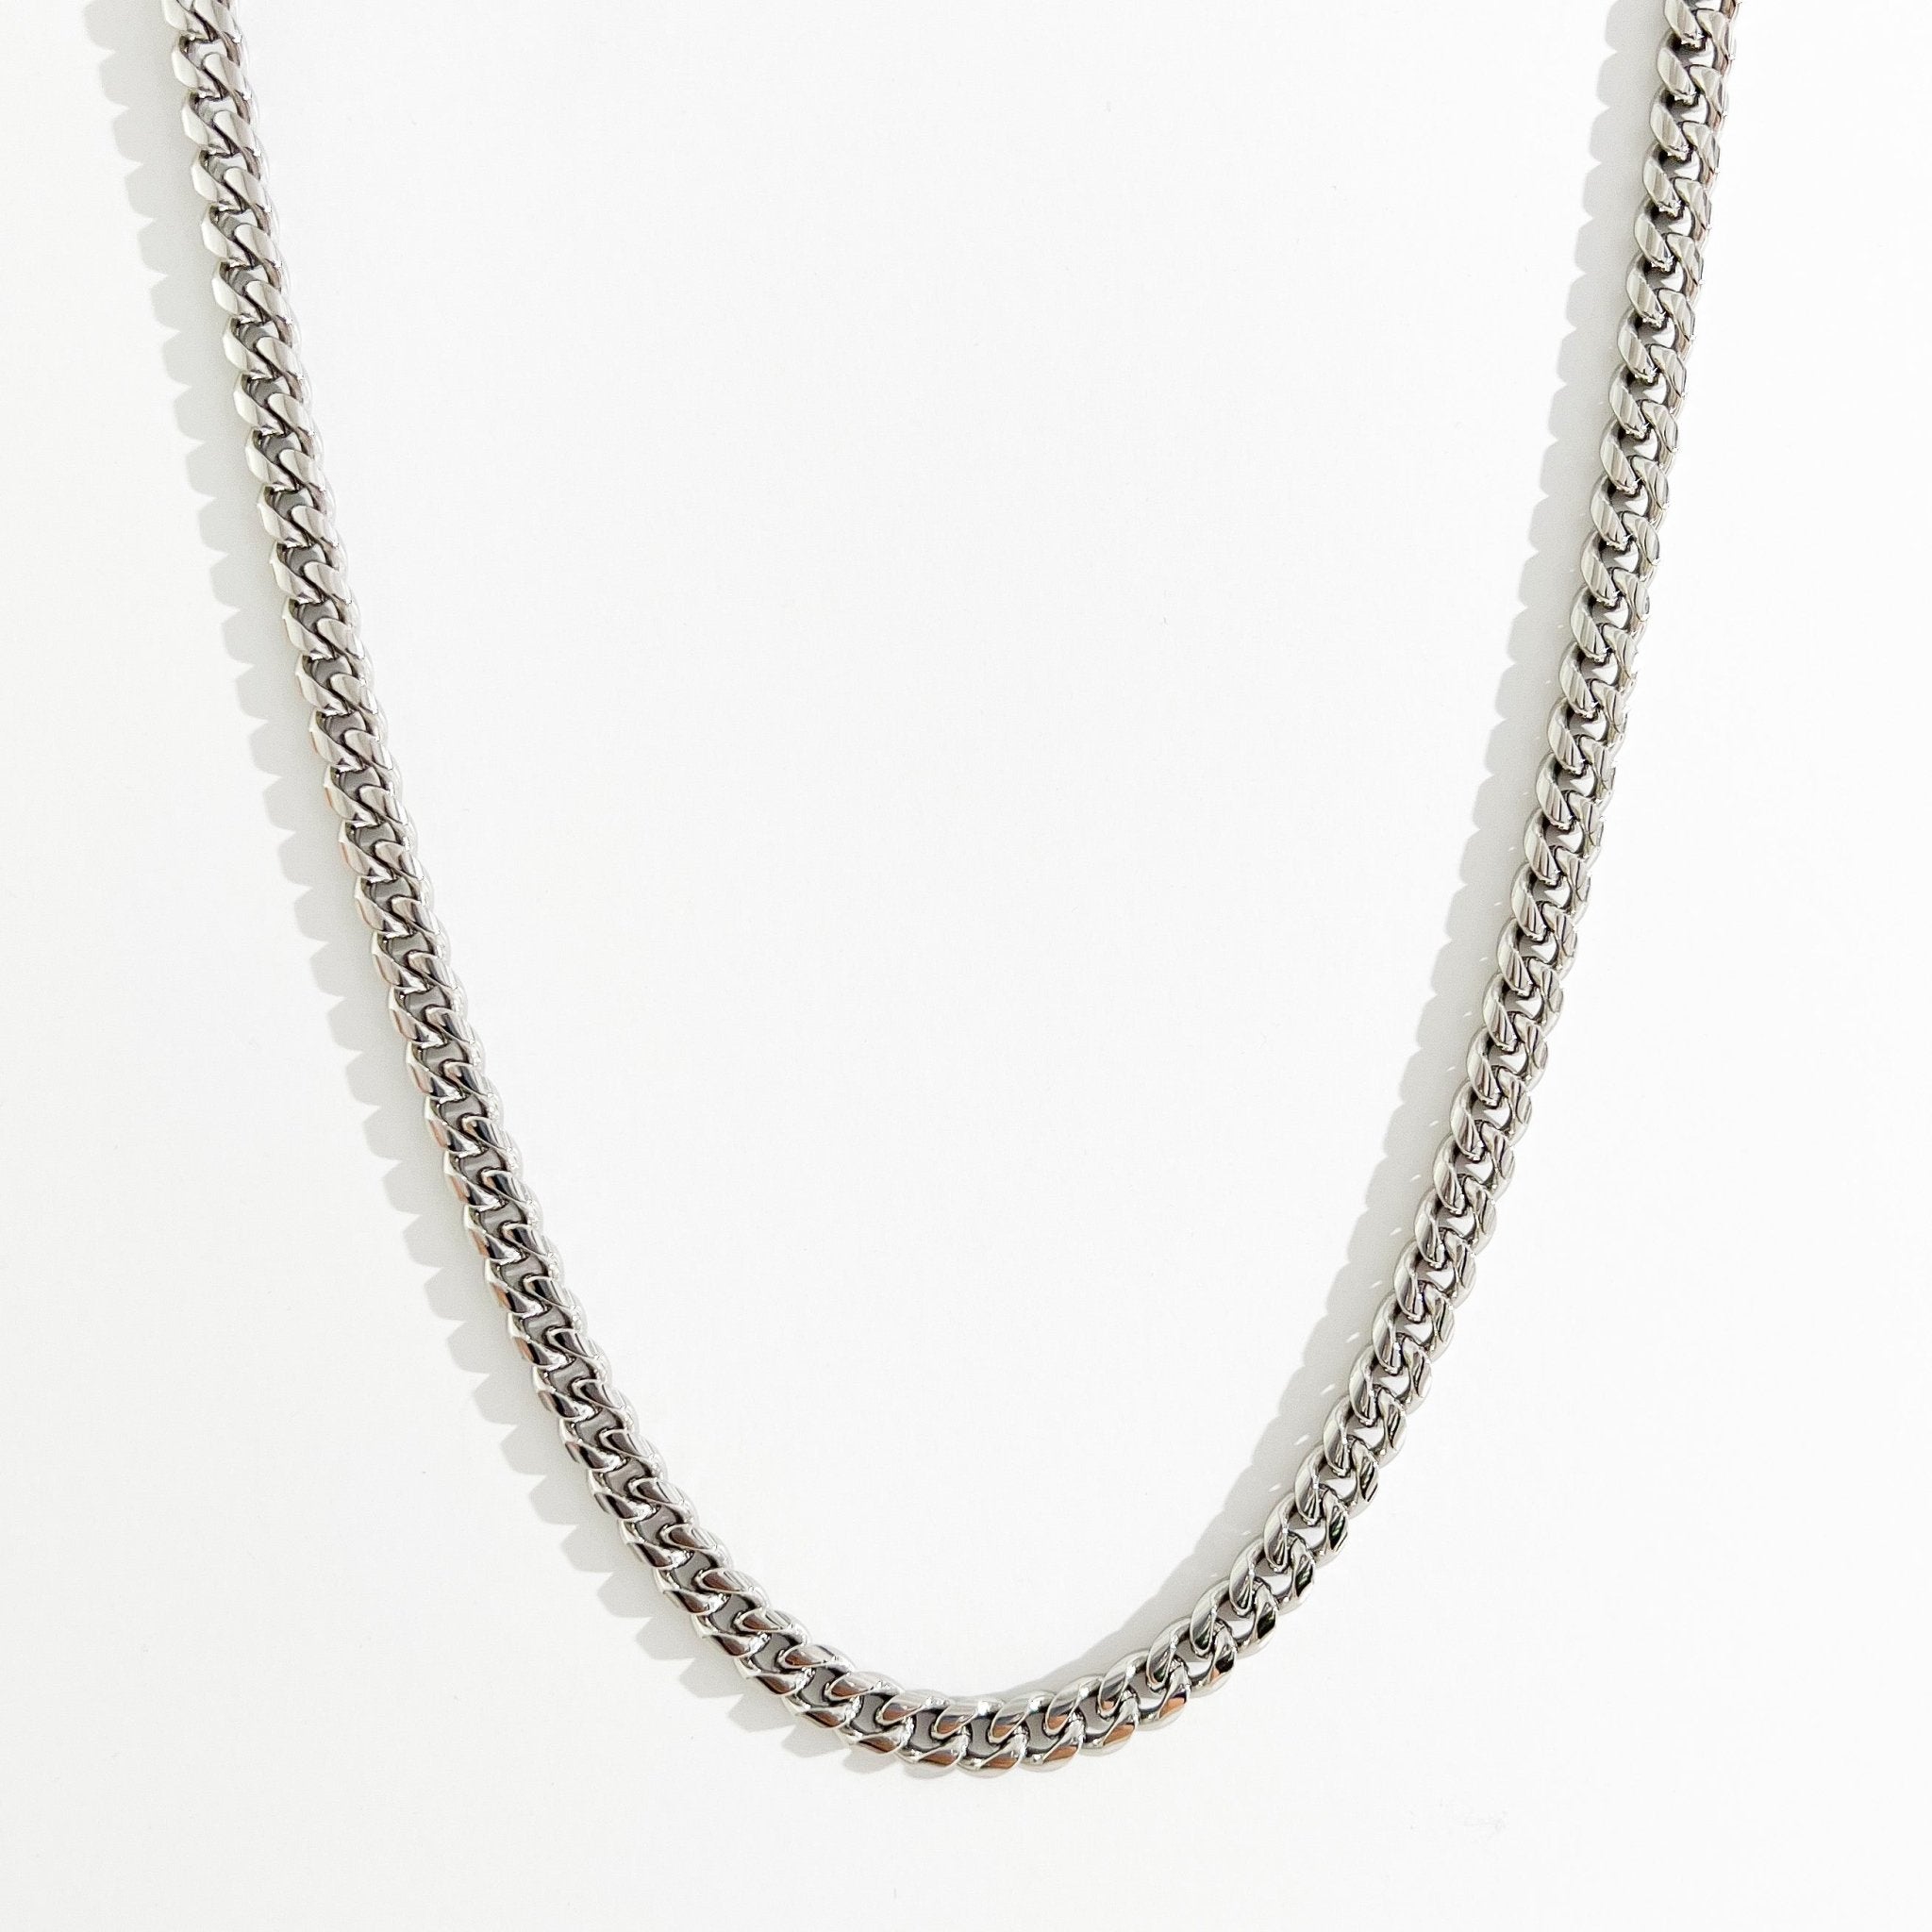 Jamie Curb Chain in Silver (Unisex) - Flaire & Co.